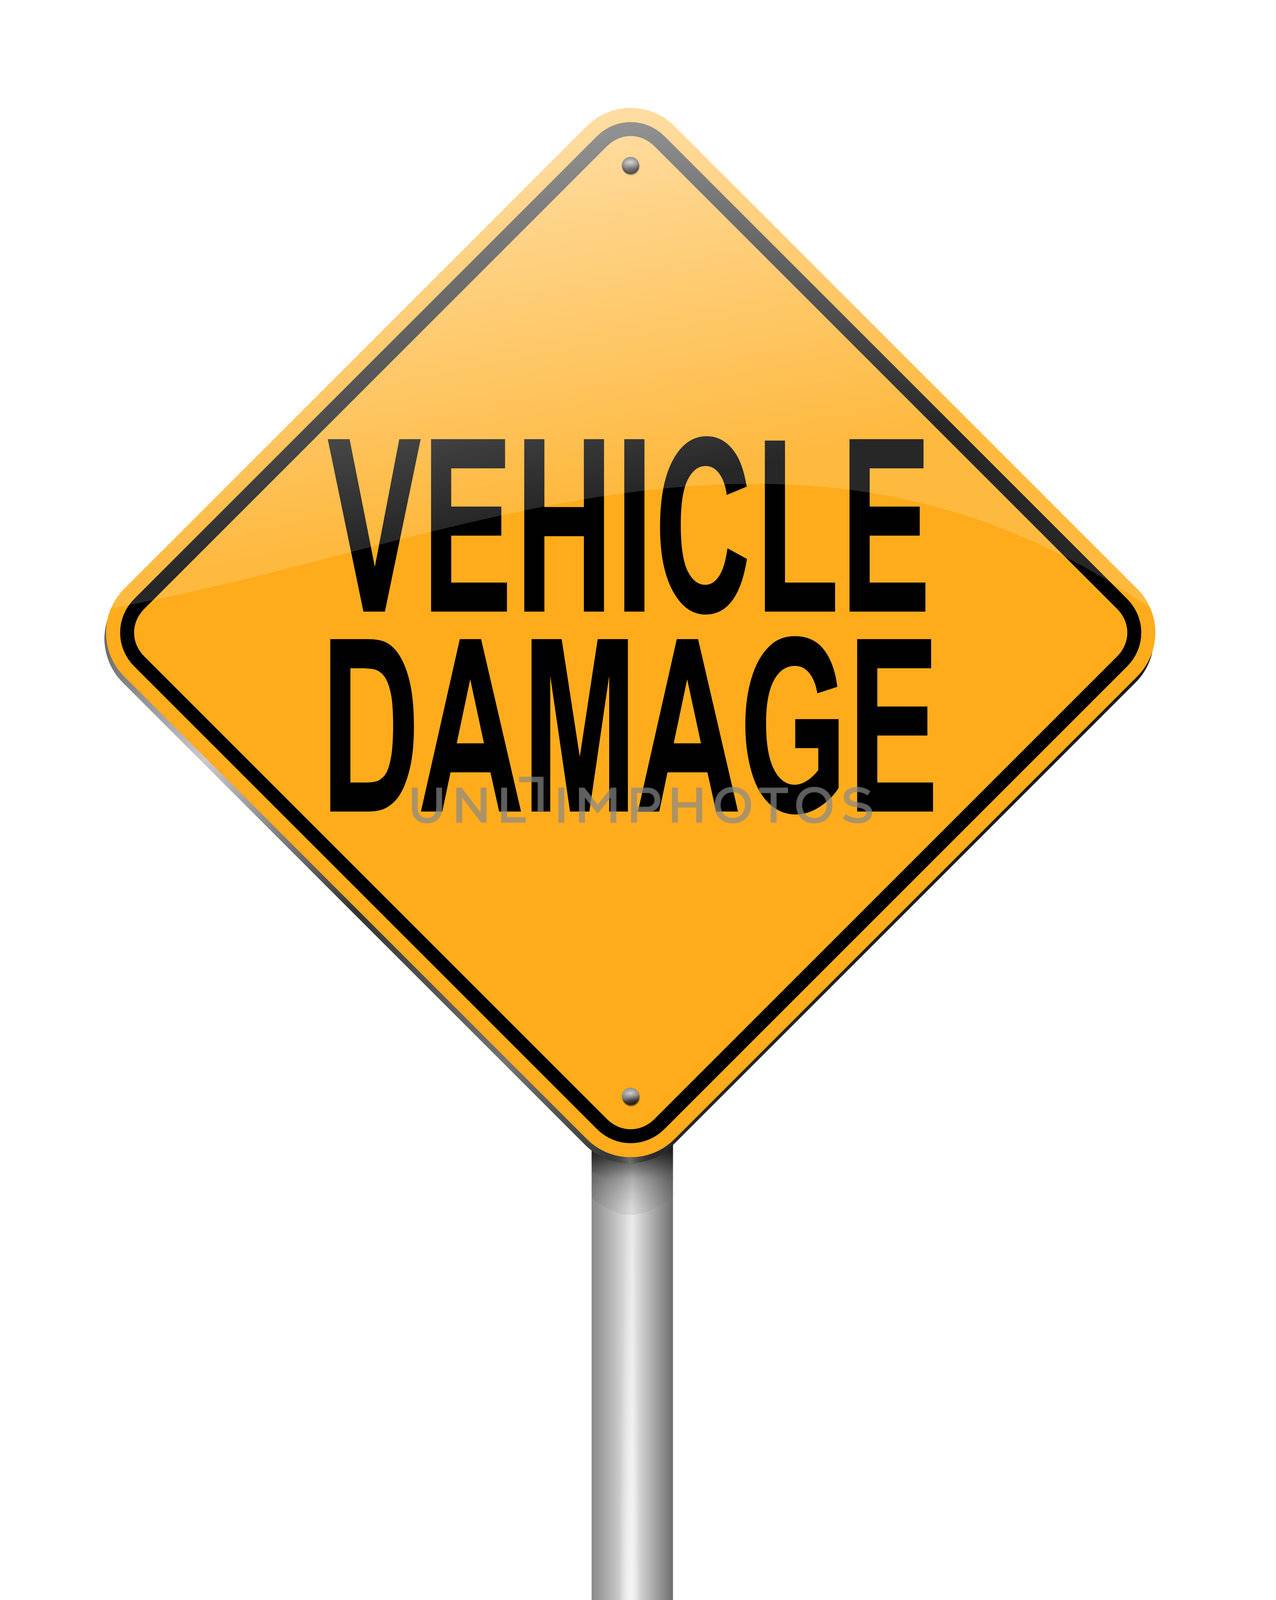 Illustration depicting a sign with a vehicle damage concept.